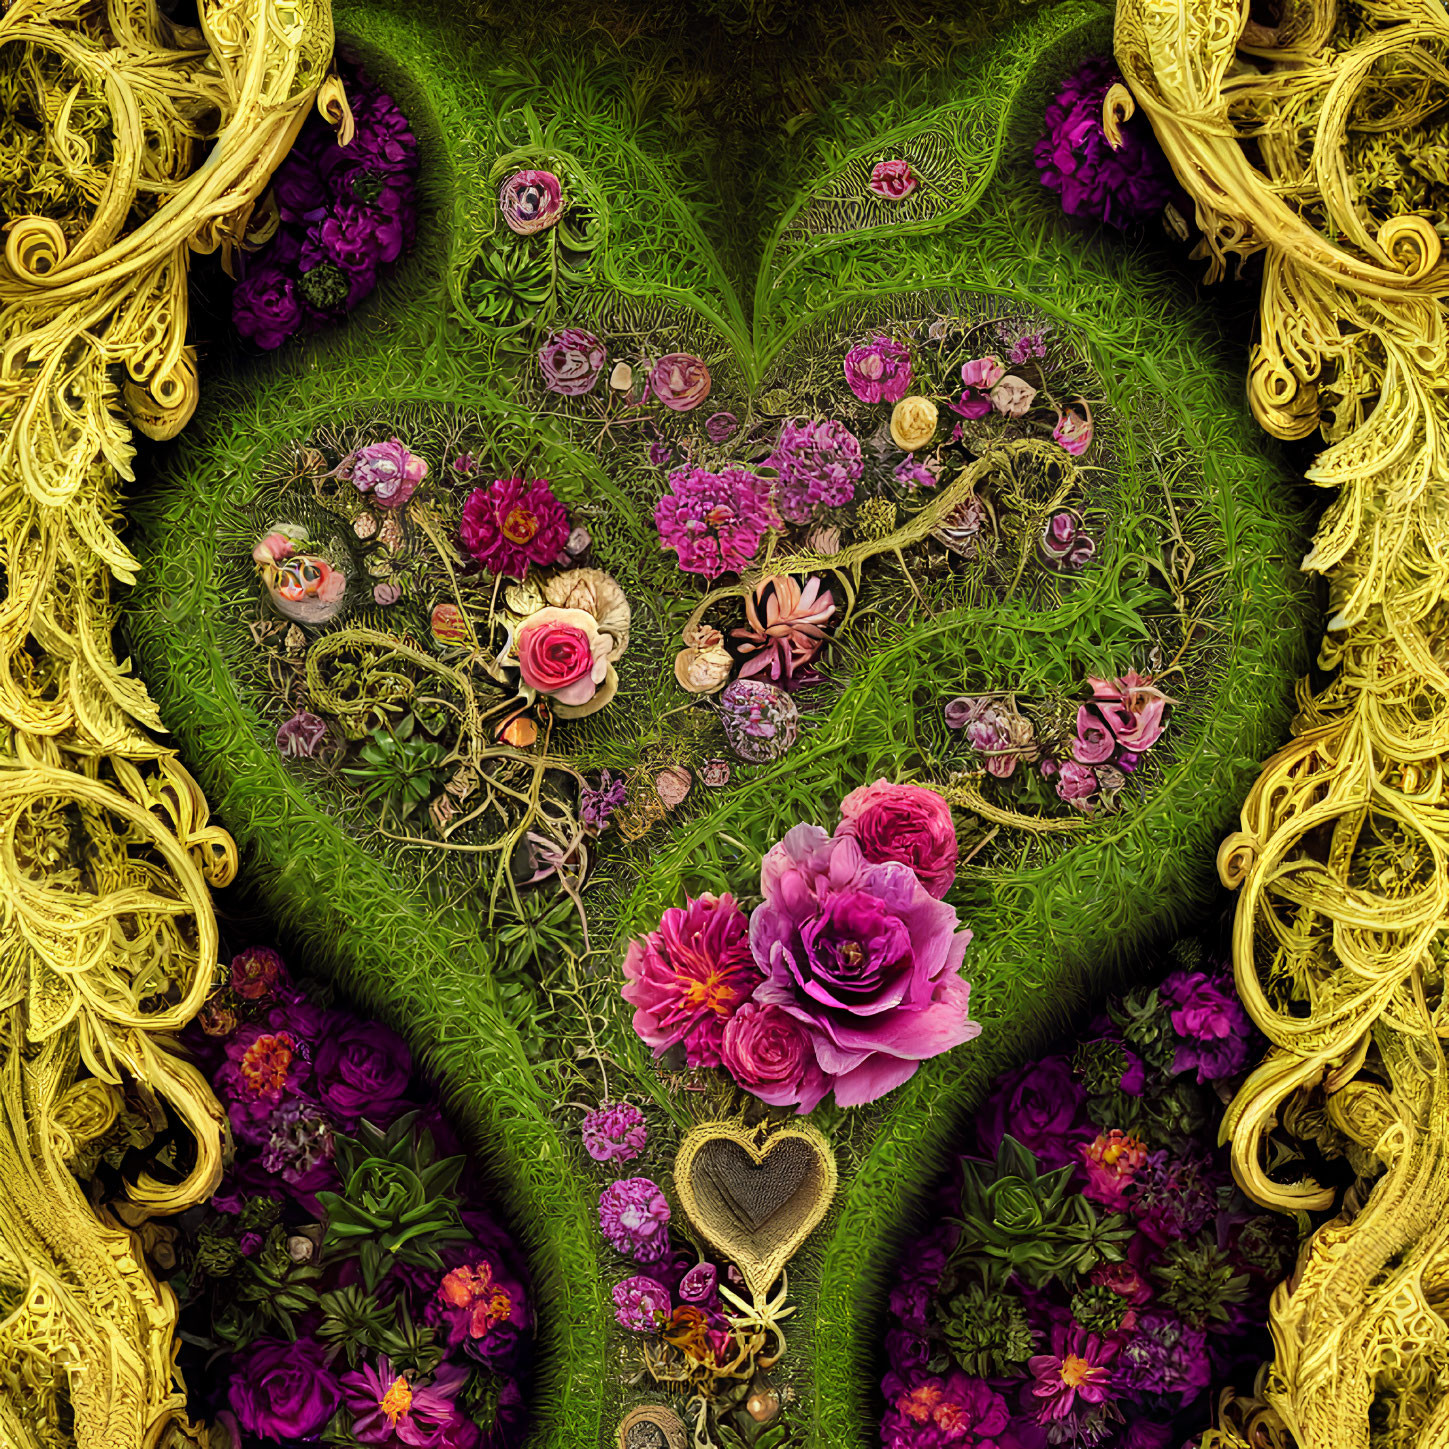 Ornate Floral Heart Artwork with Lush Flowers & Foliage